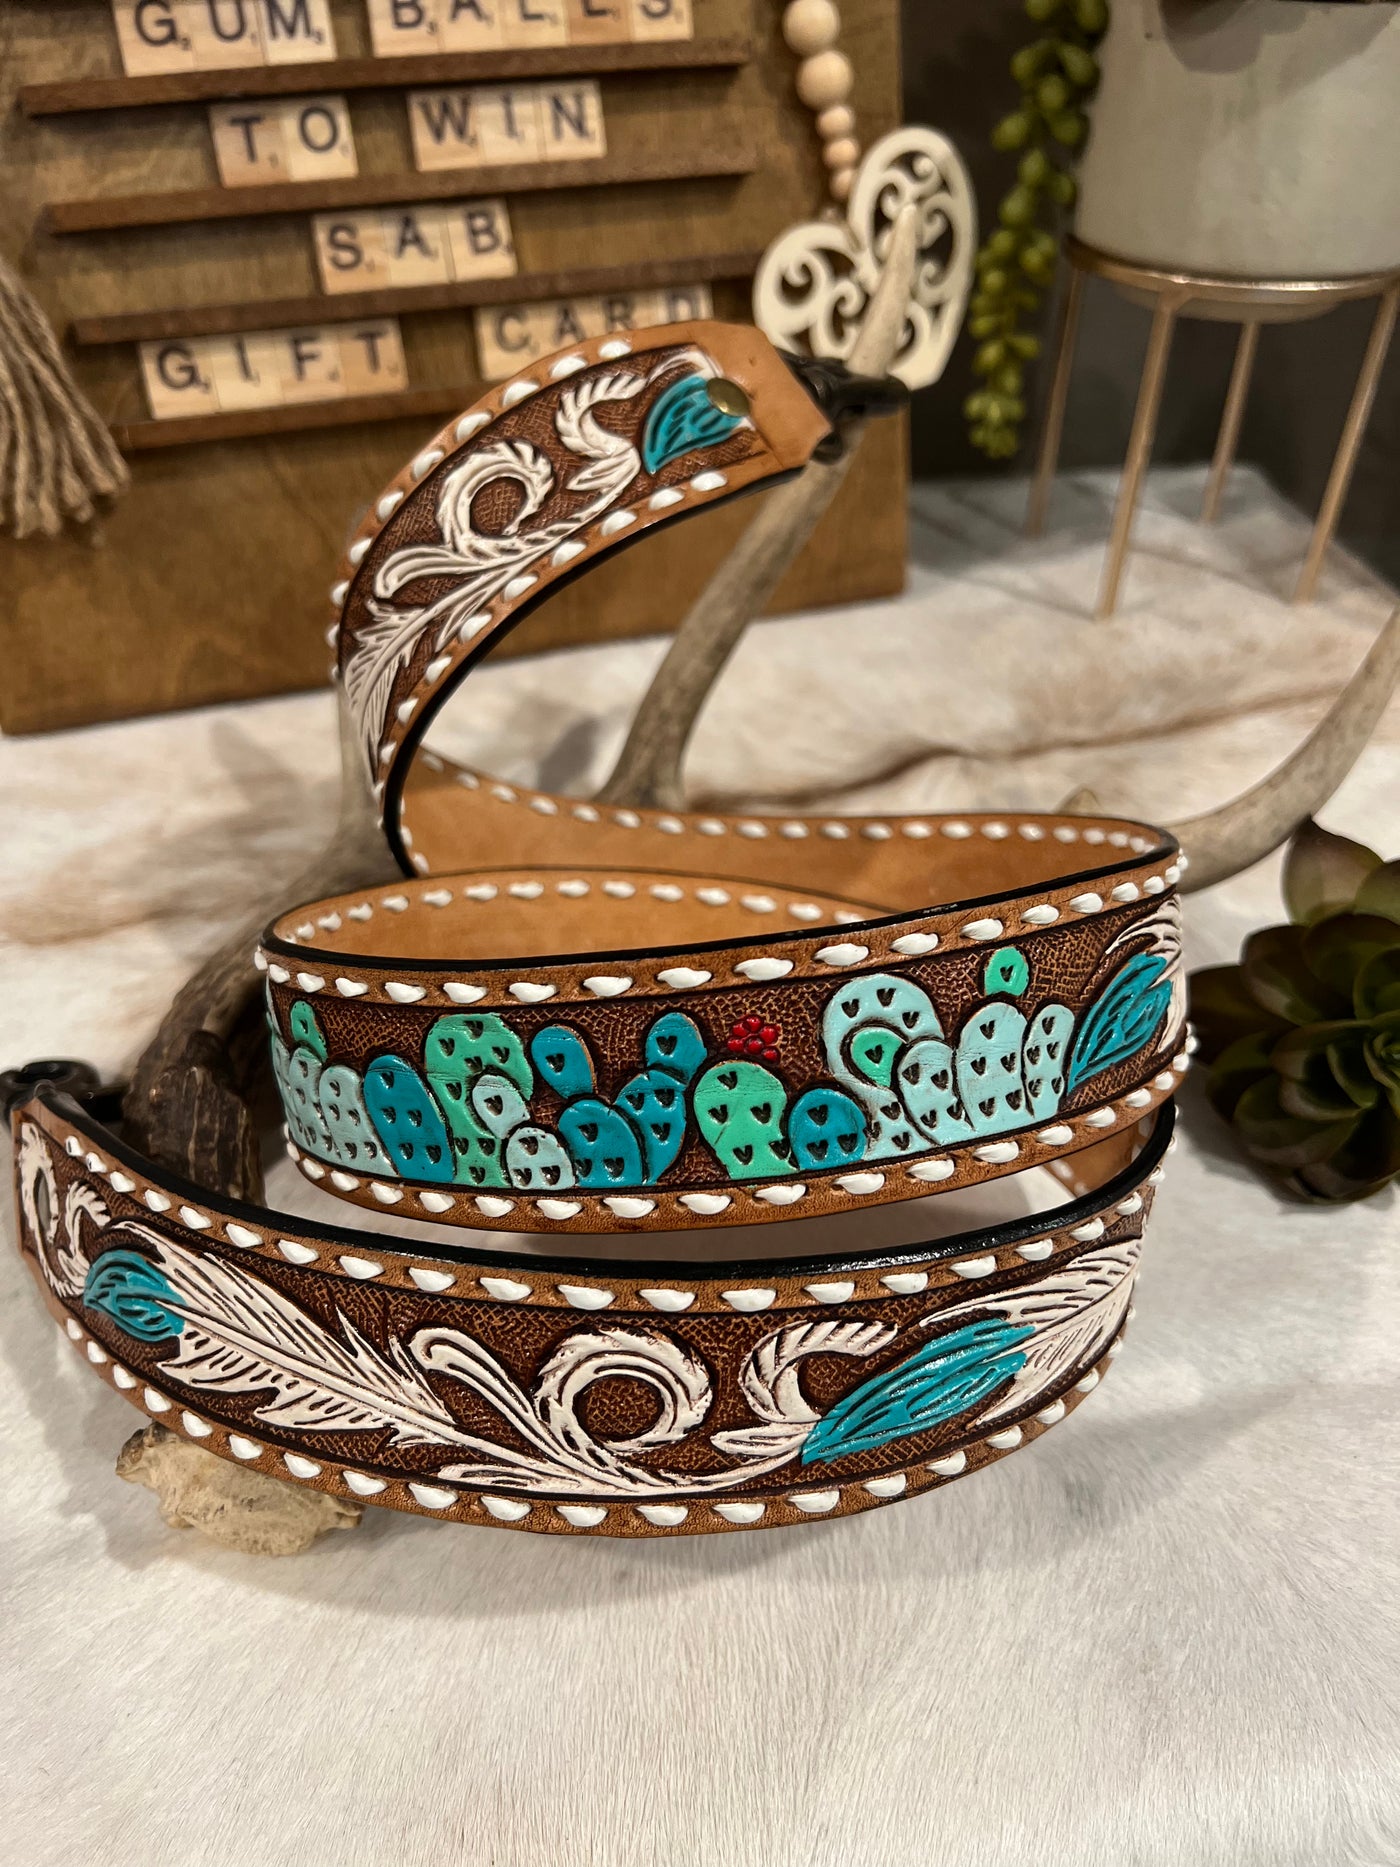 Tooled Leather Purse Strap ~ White & Turquoise Feather